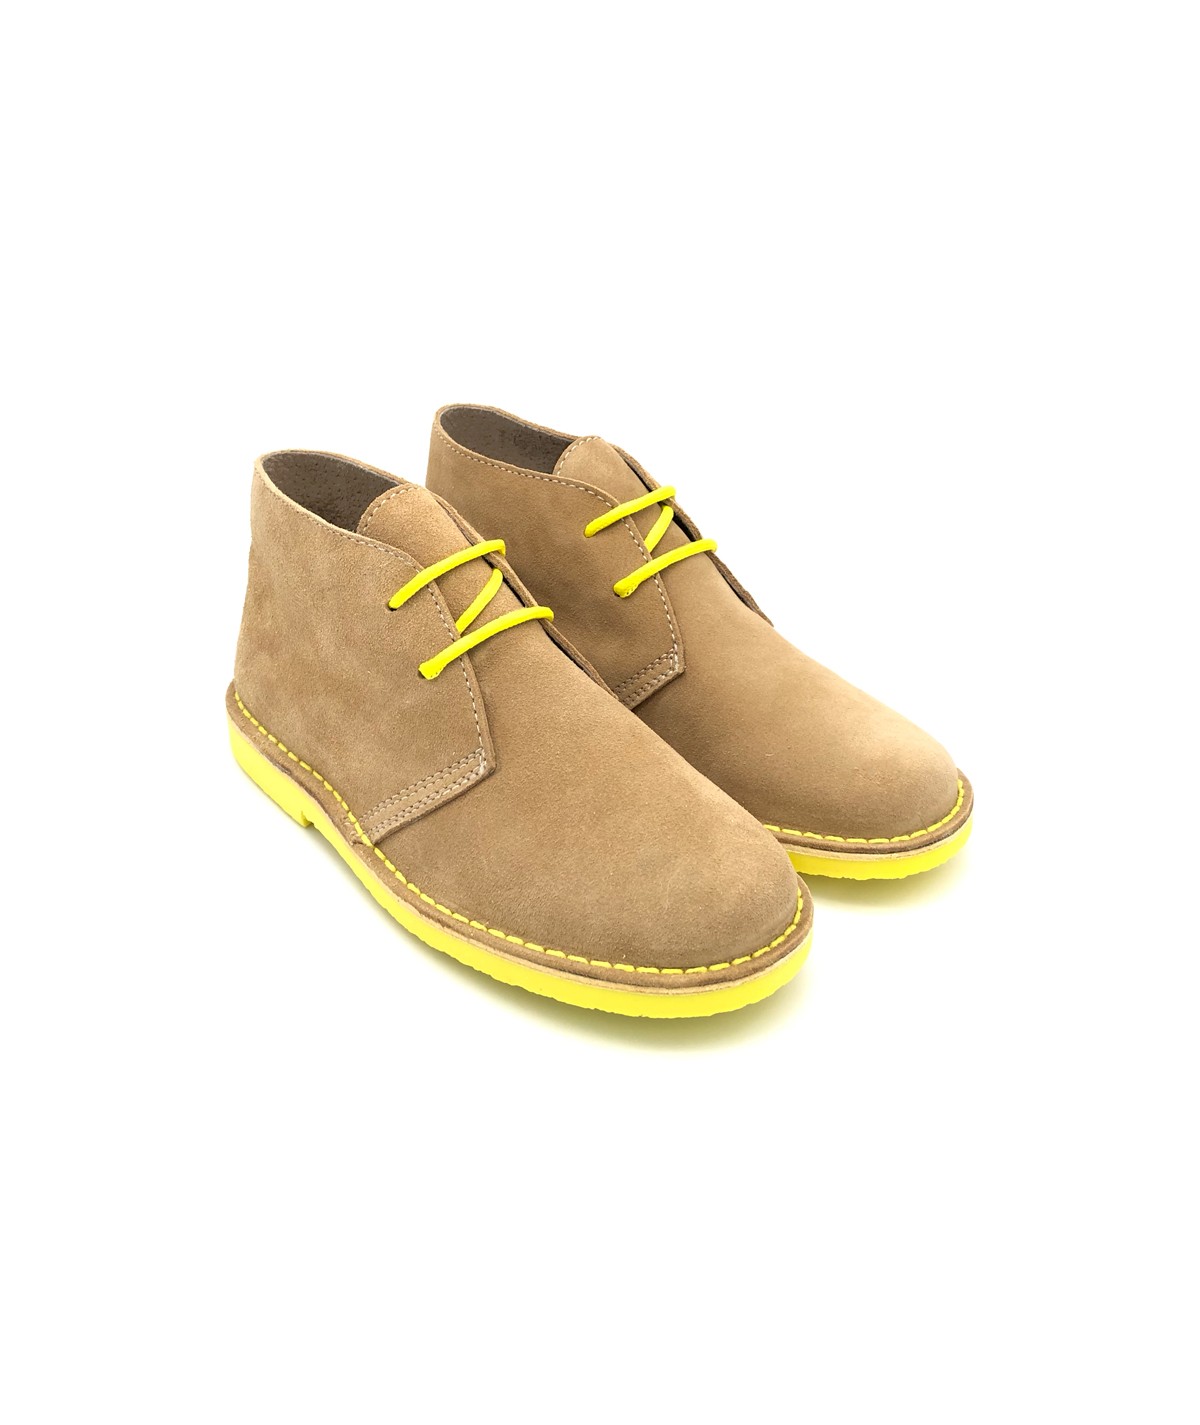 Bicolor sand & yellow color for men